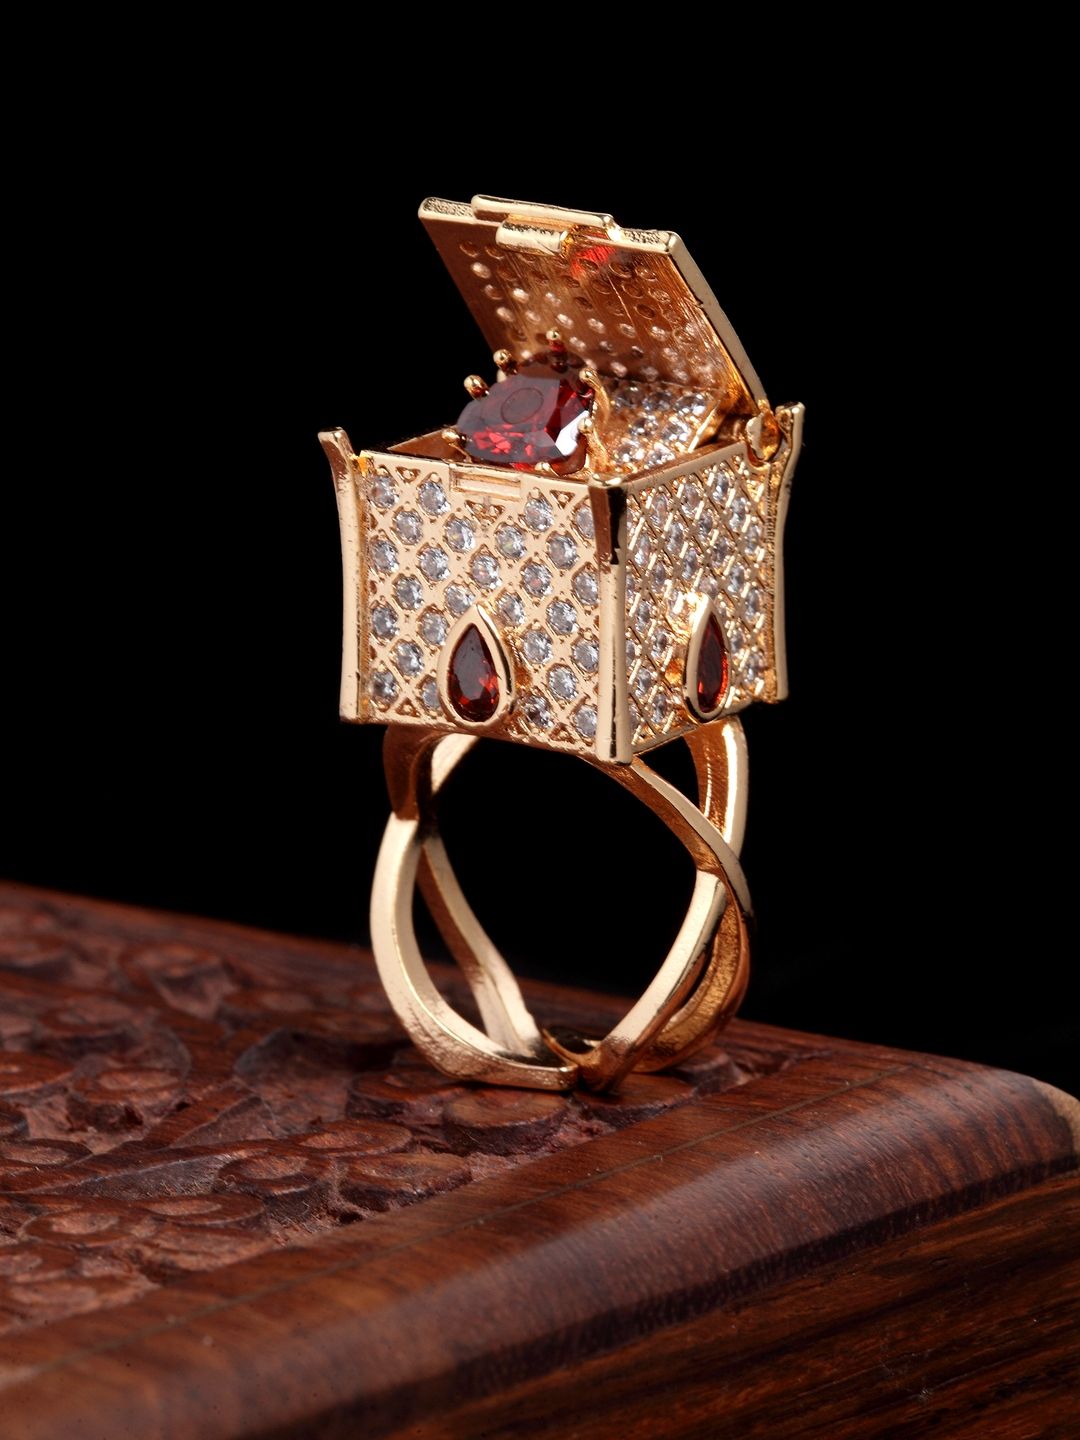 VOGUE PANASH Gold-Plated White & Red AD-Studded Box-Shaped Handcrafted Sustainable Adjustable Finger Ring Price in India